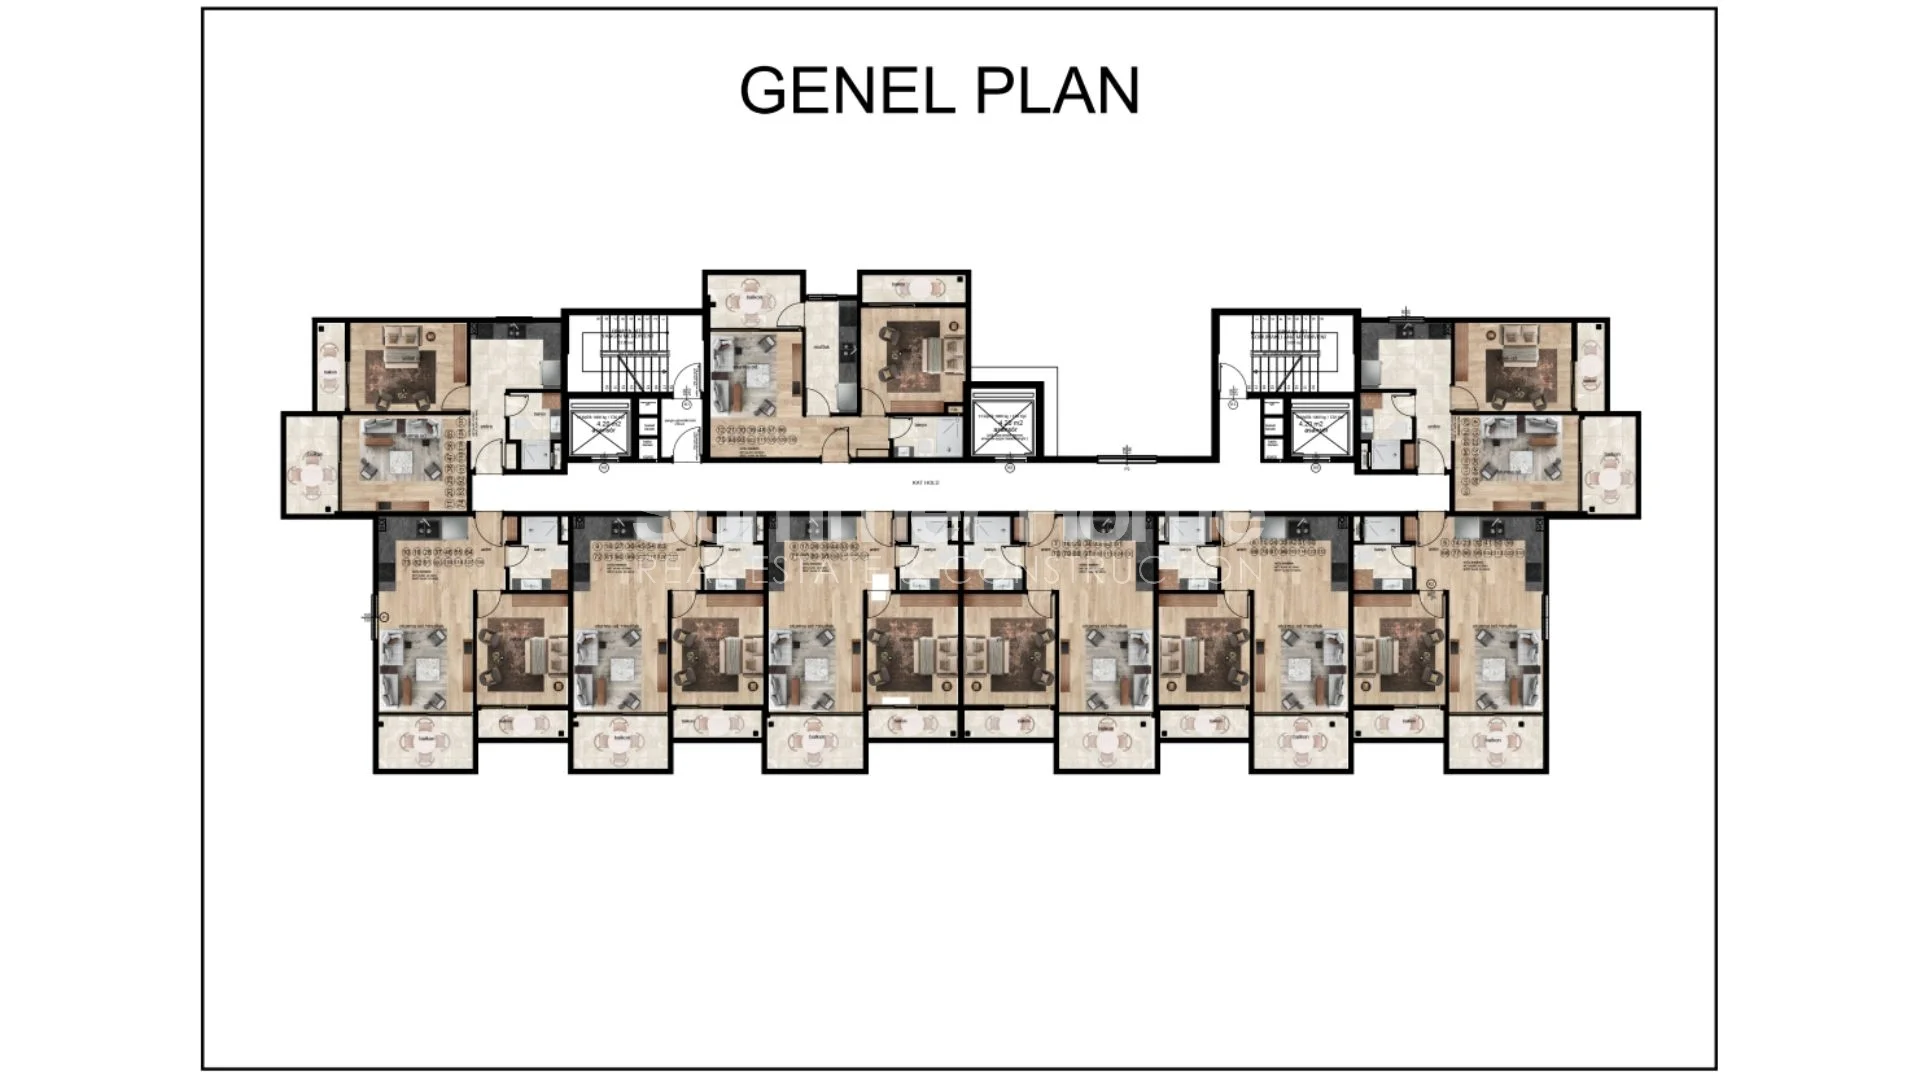 Contemporary establishment, located in Tomuk, west of Mersin Plan - 23